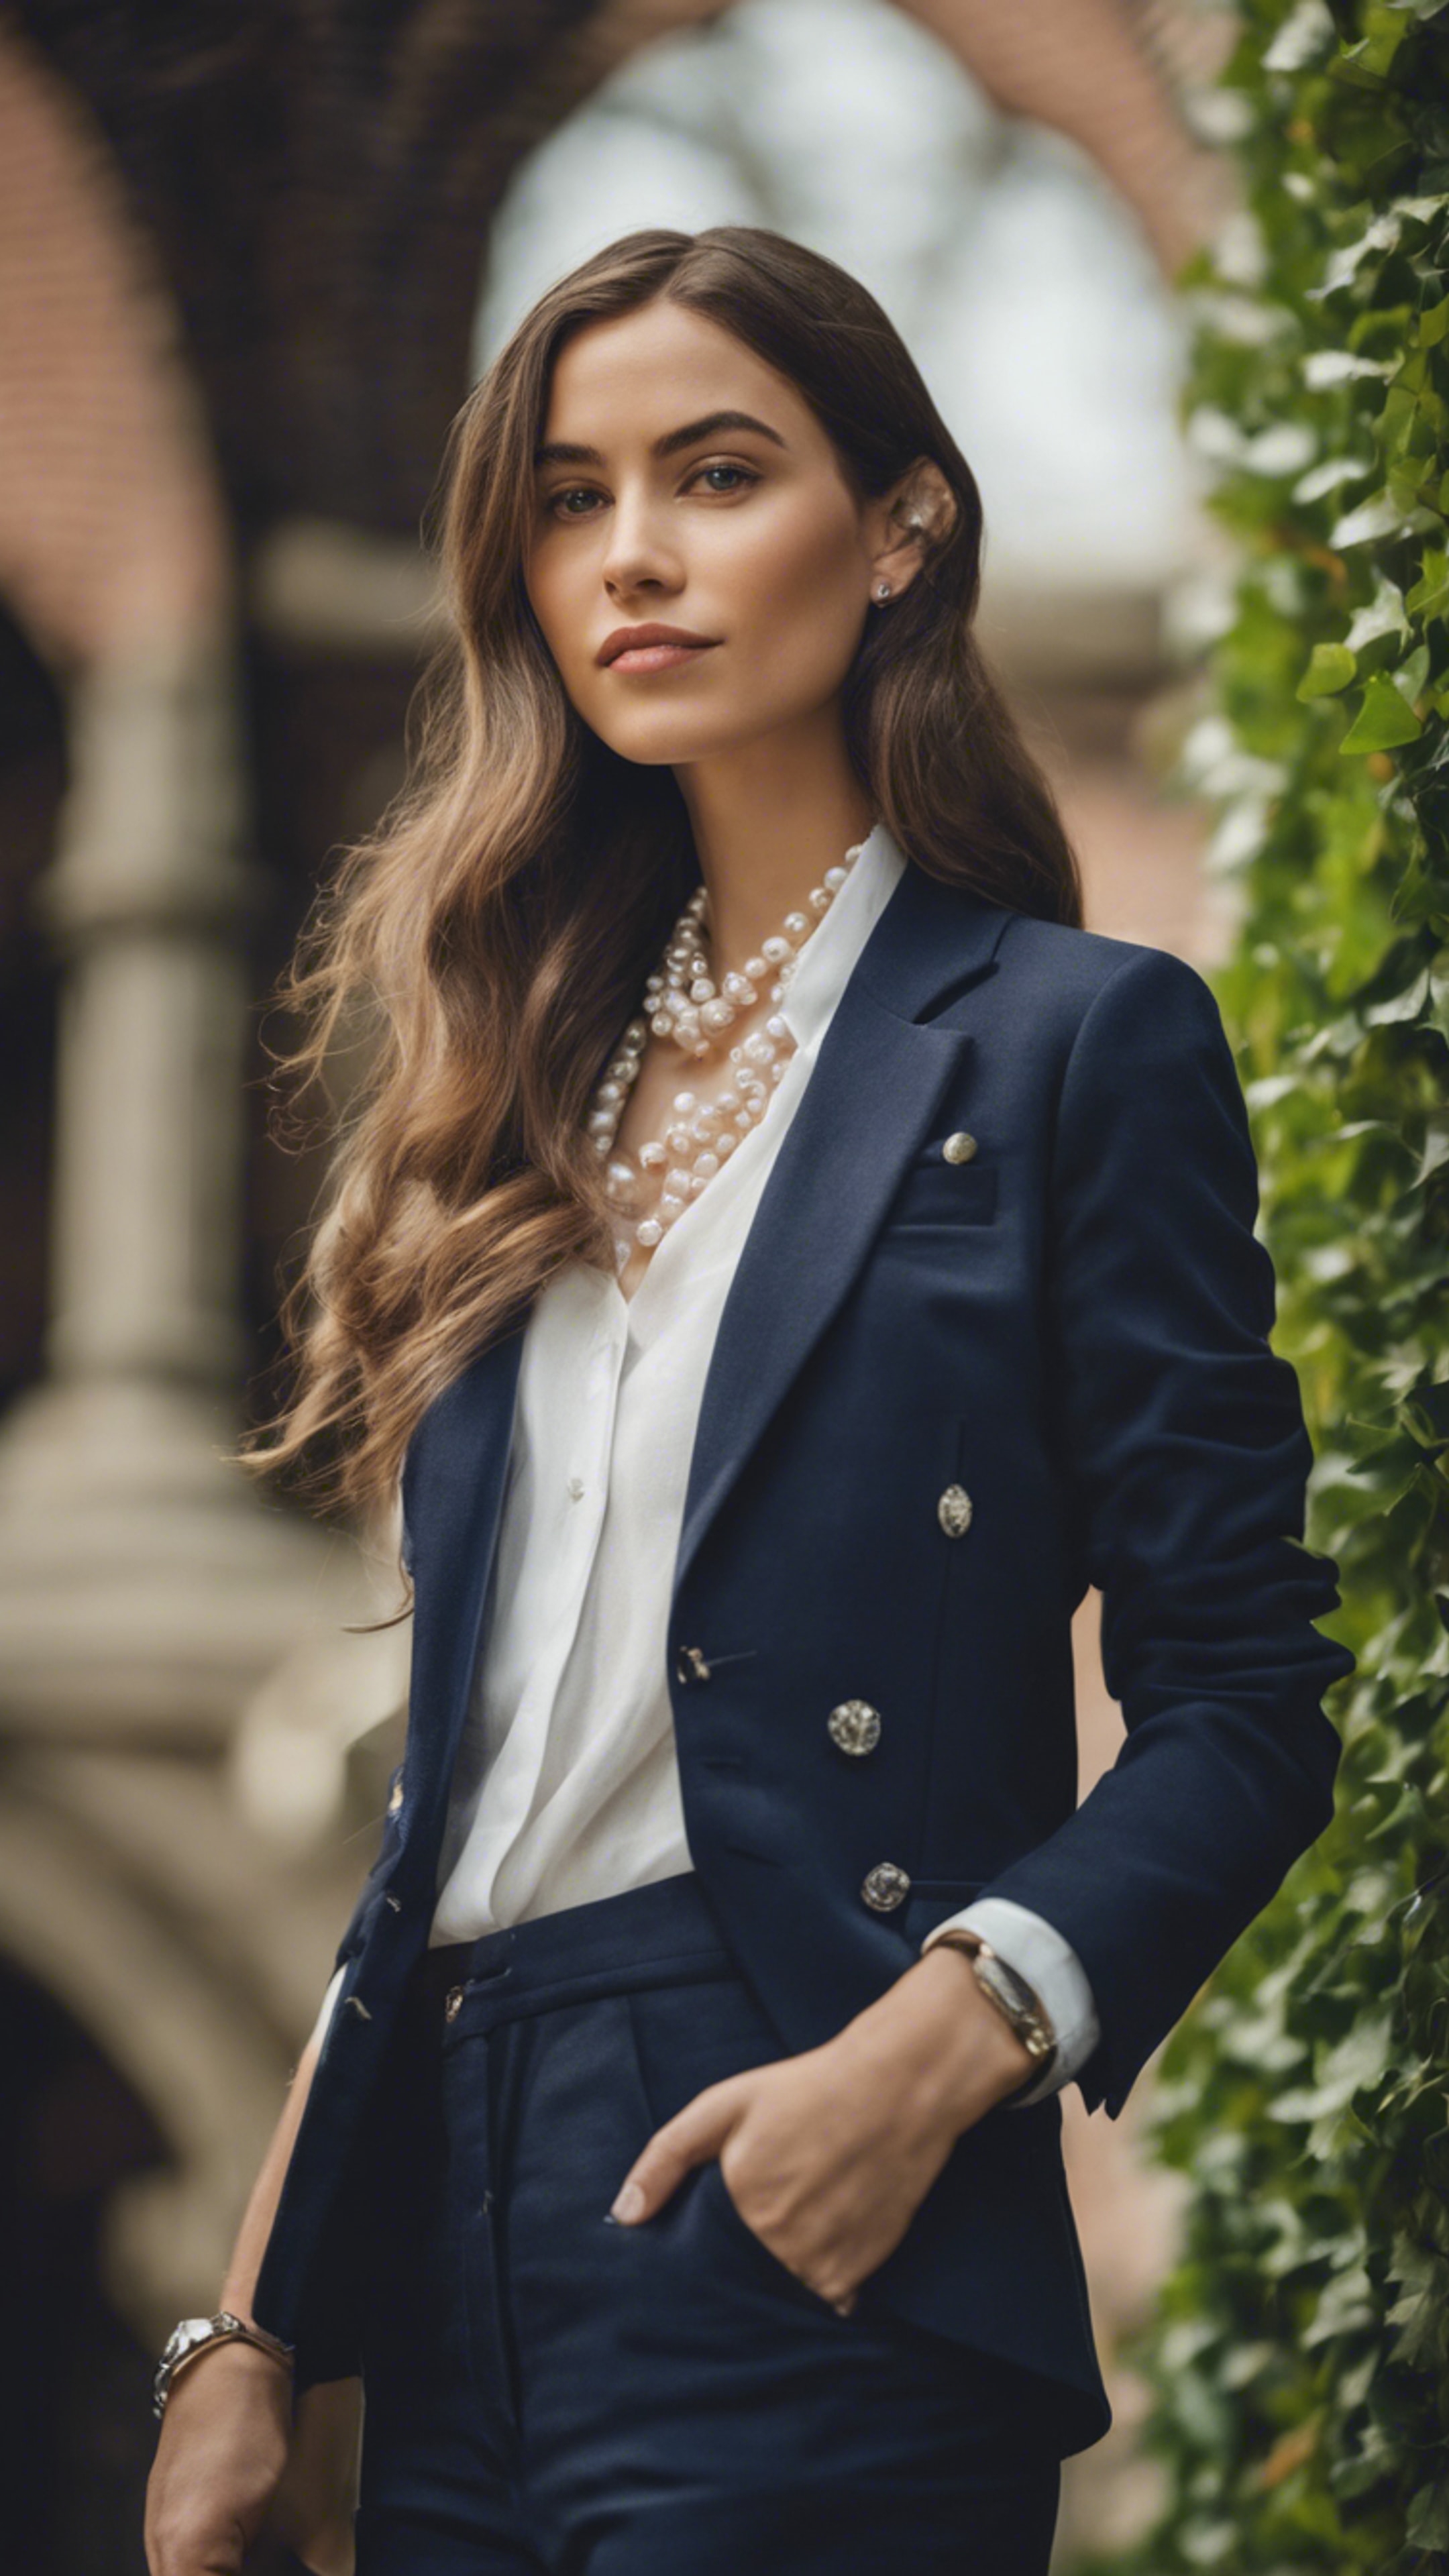 A portrait of a preppy woman in a navy blue blazer, pearl necklace, and a white linen shirt, posing in an Ivy League campus. Behang[1775f808339c45cb81cf]